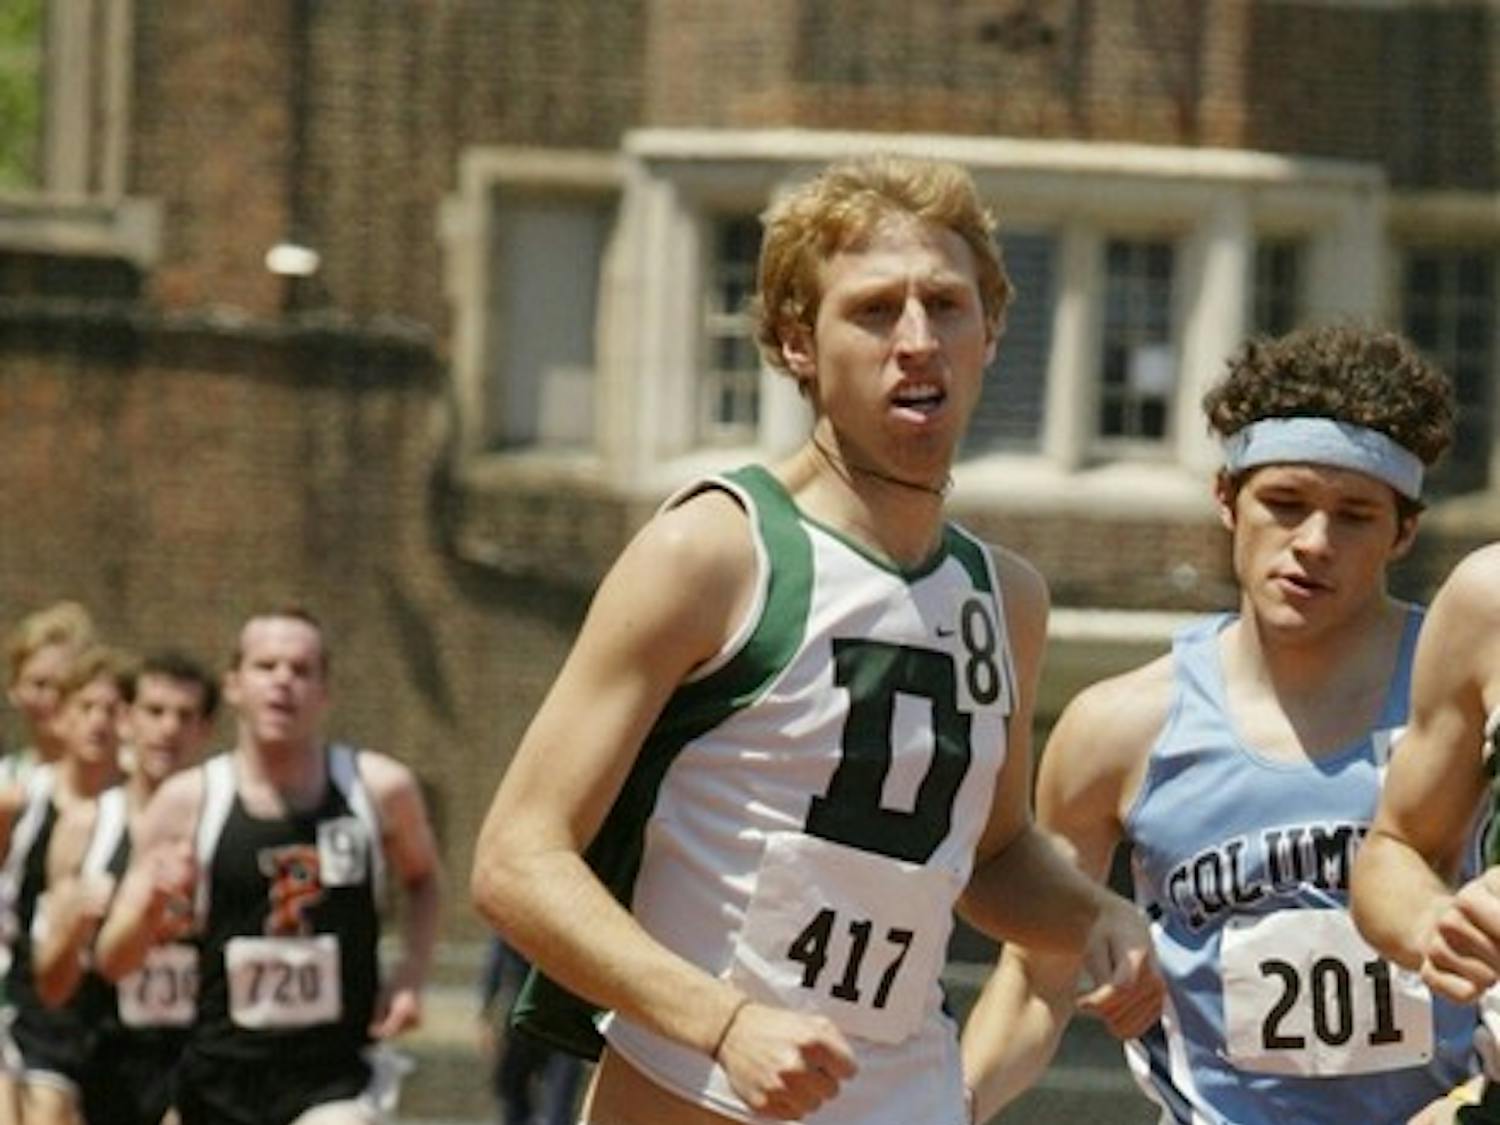 Harry Norton '08 enjoyed a stellar year on the track and in the classroom.